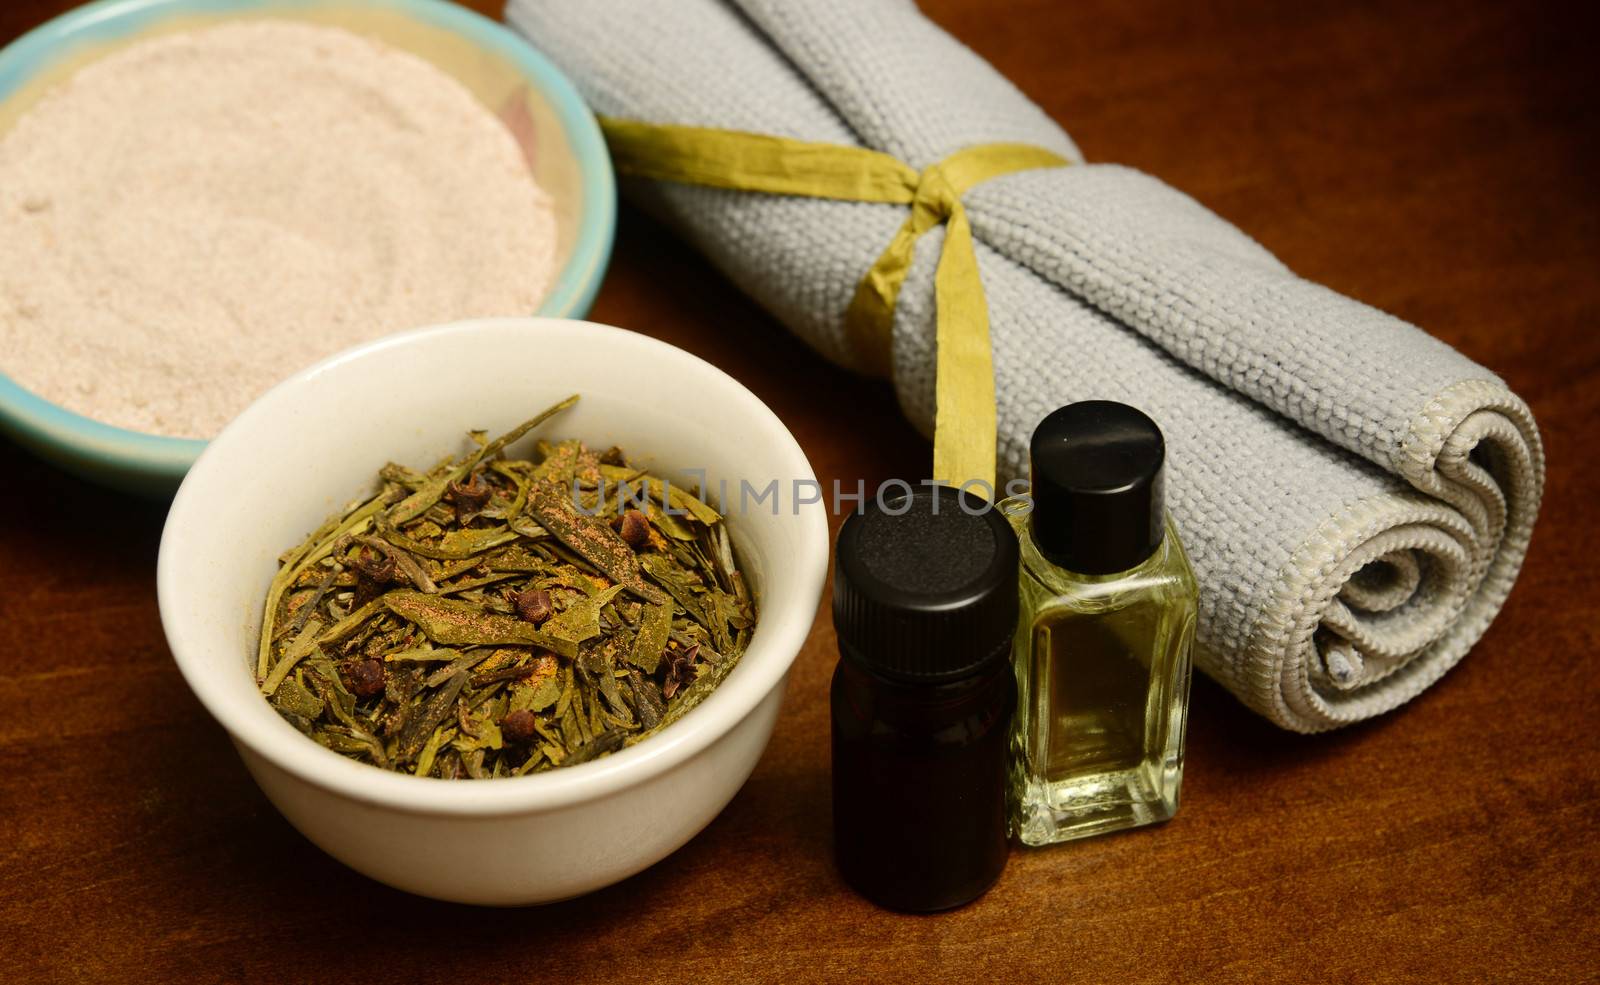 essential oils and herbs for aromatherapy spa treatment for wellness